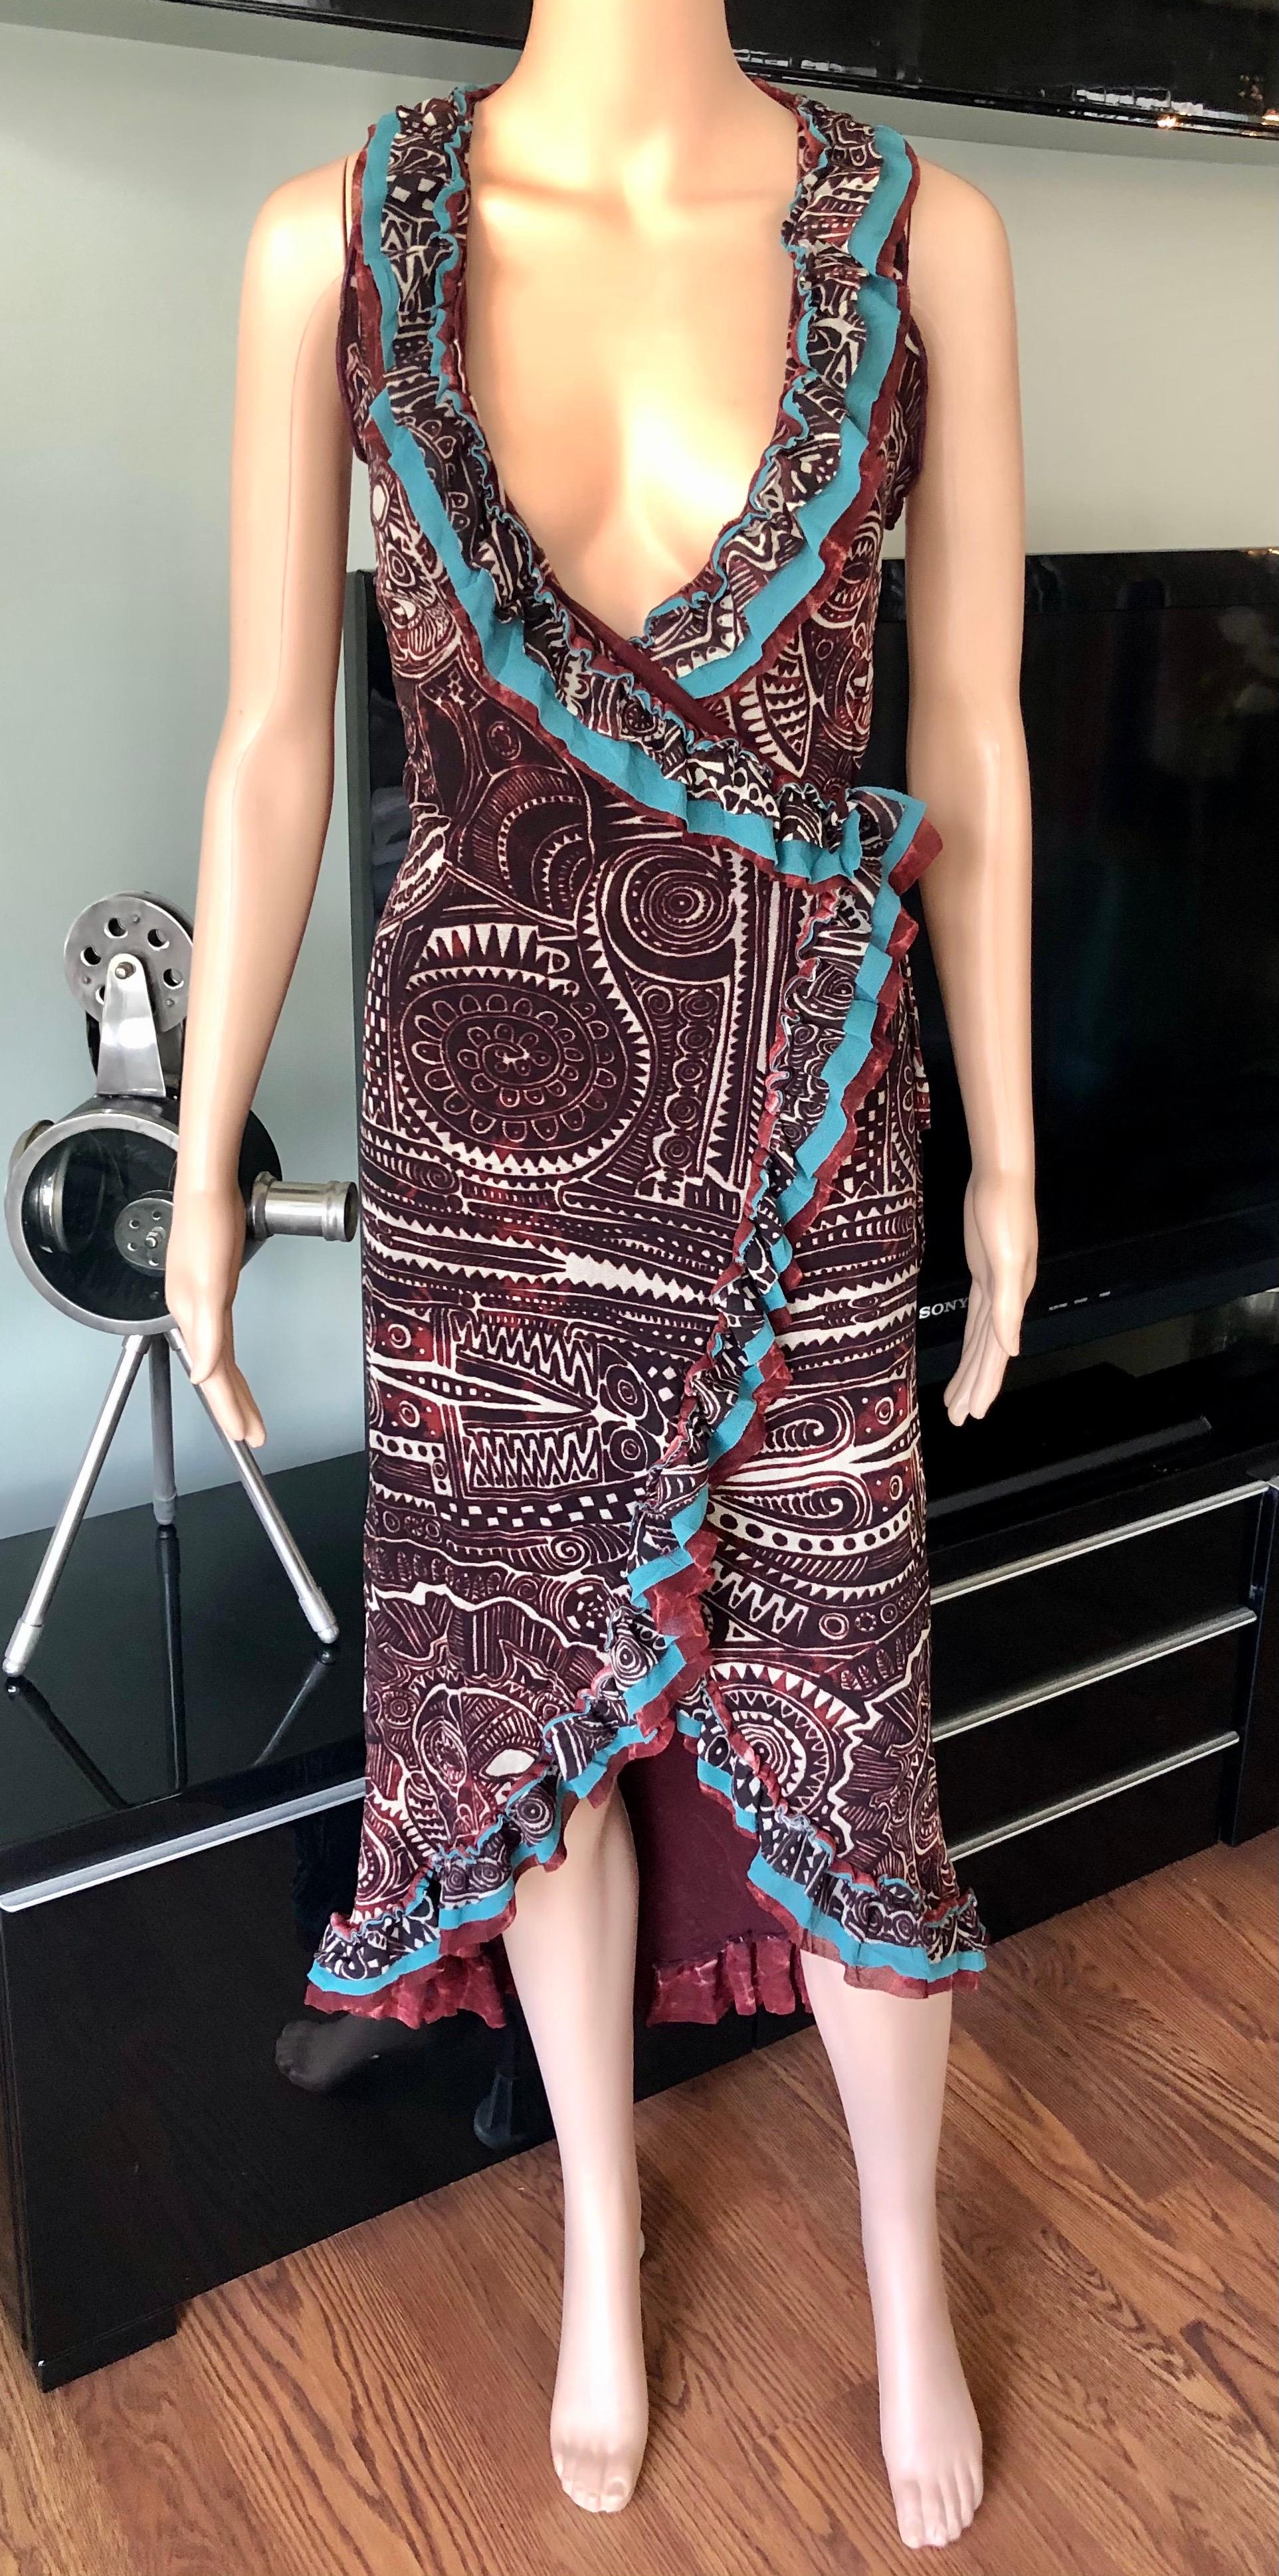 Jean Paul Gaultier Classique 1990's Vintage Tribal Aztec Tattoo Print Wrap Dress In Good Condition For Sale In Naples, FL